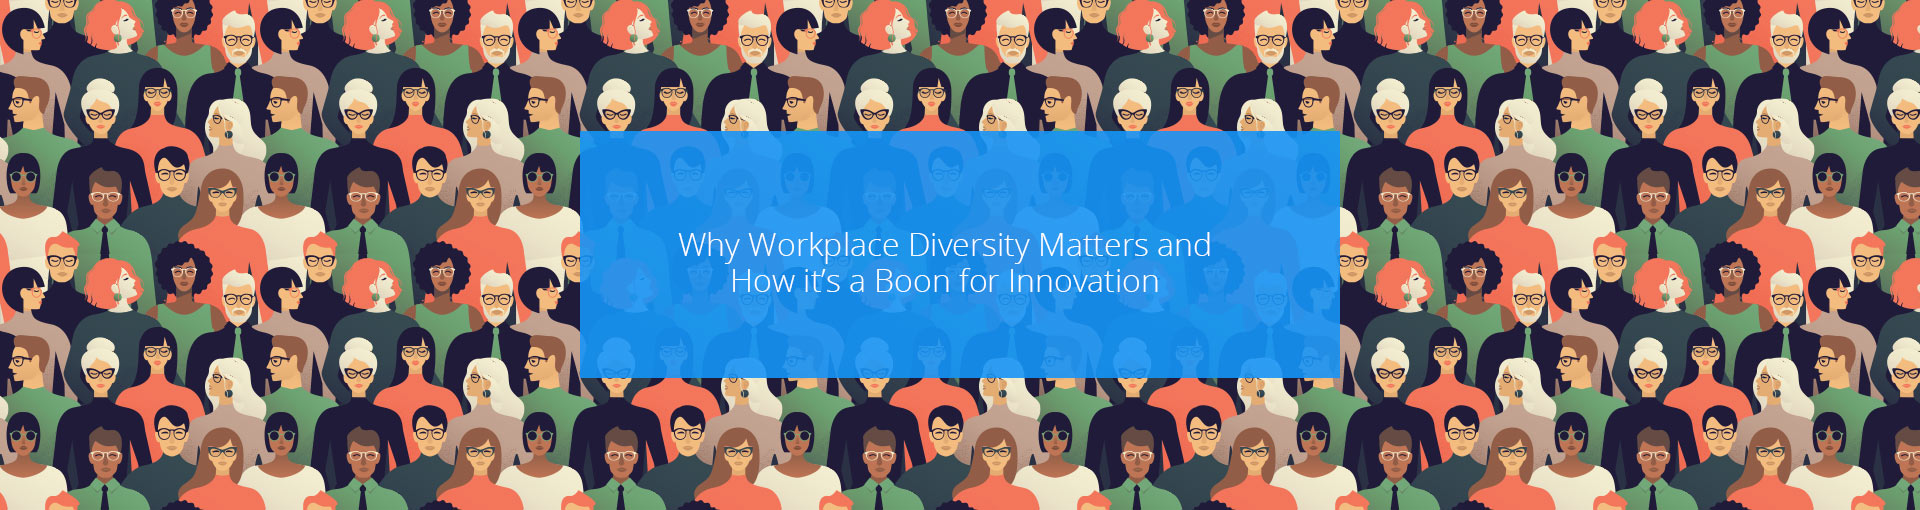 Why Workplace Diversity Matters and How it’s a Boon for Innovation Featured Image